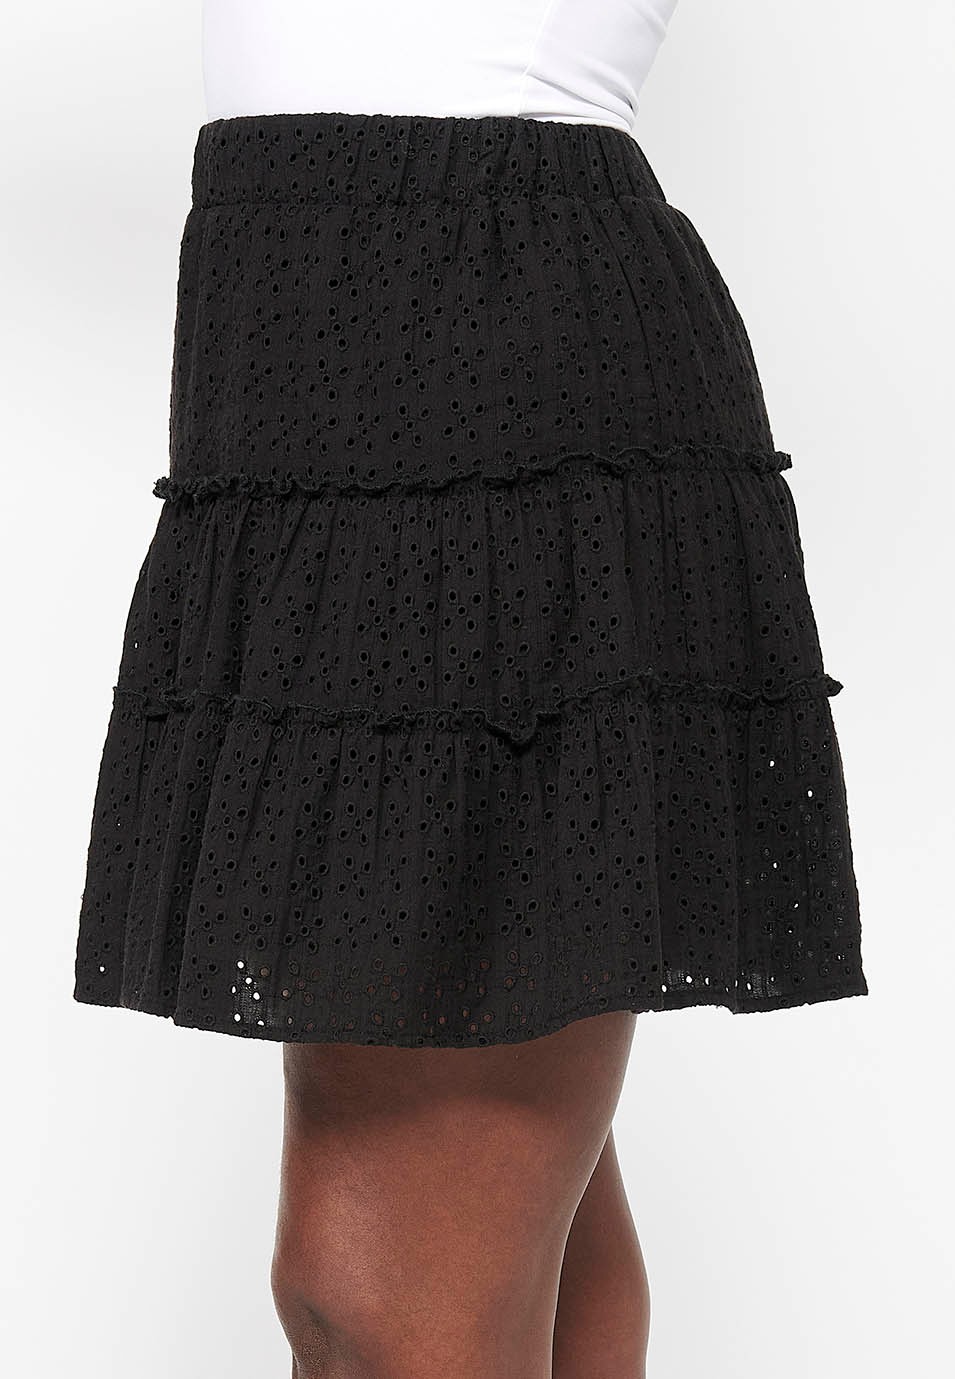 Short Cotton Skirt with Ruffle and Adjusted Waist with Elastic Band with Black Embroidered Fabric for Women 4